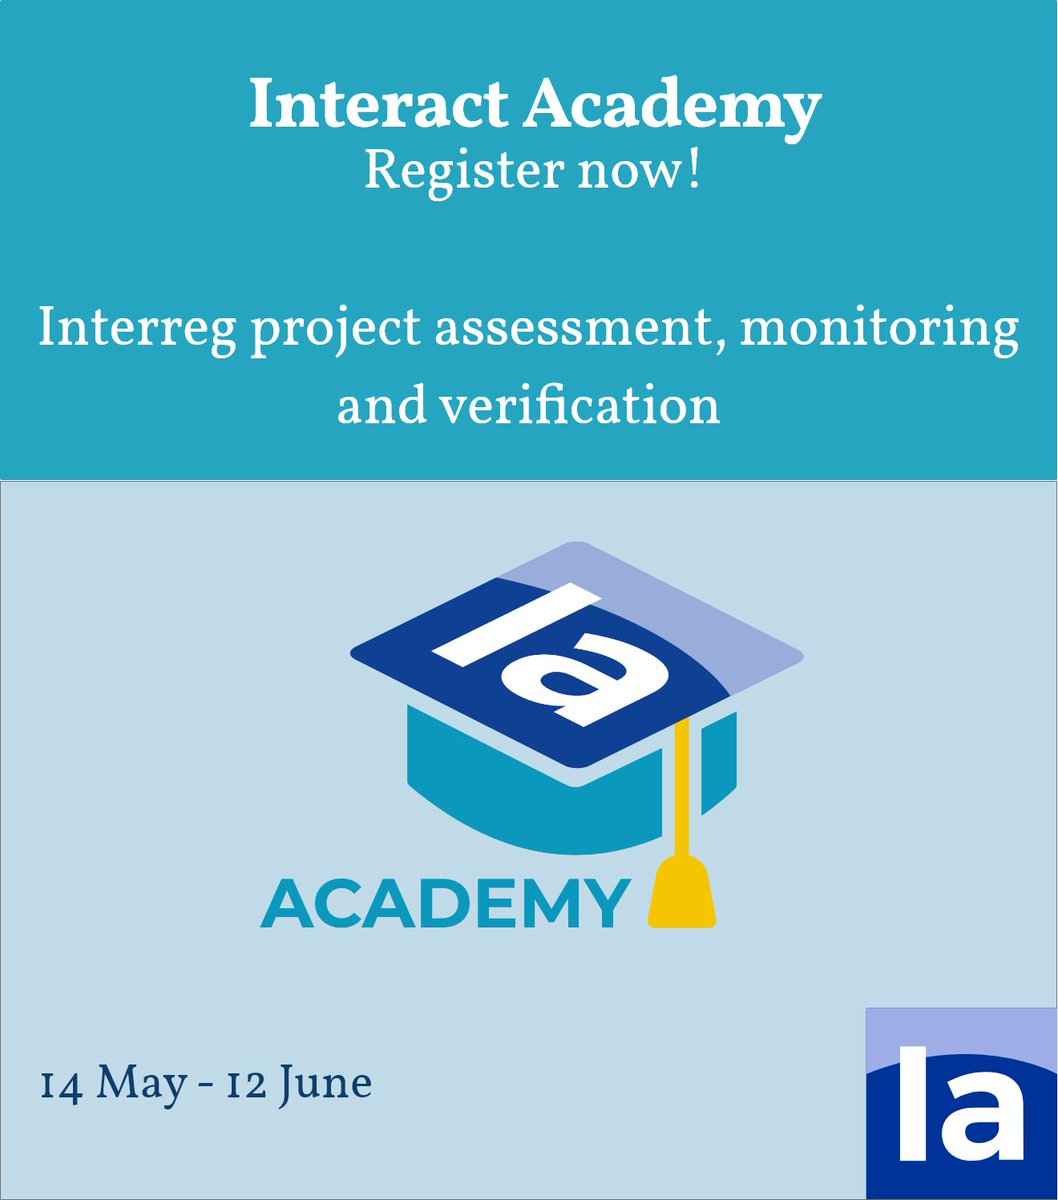 The Certified Training Interreg project assessment, monitoring and verification is now open for registration! Read more and register here: academy.interact.eu/enrol/index.ph… The deadline to register is 6 May